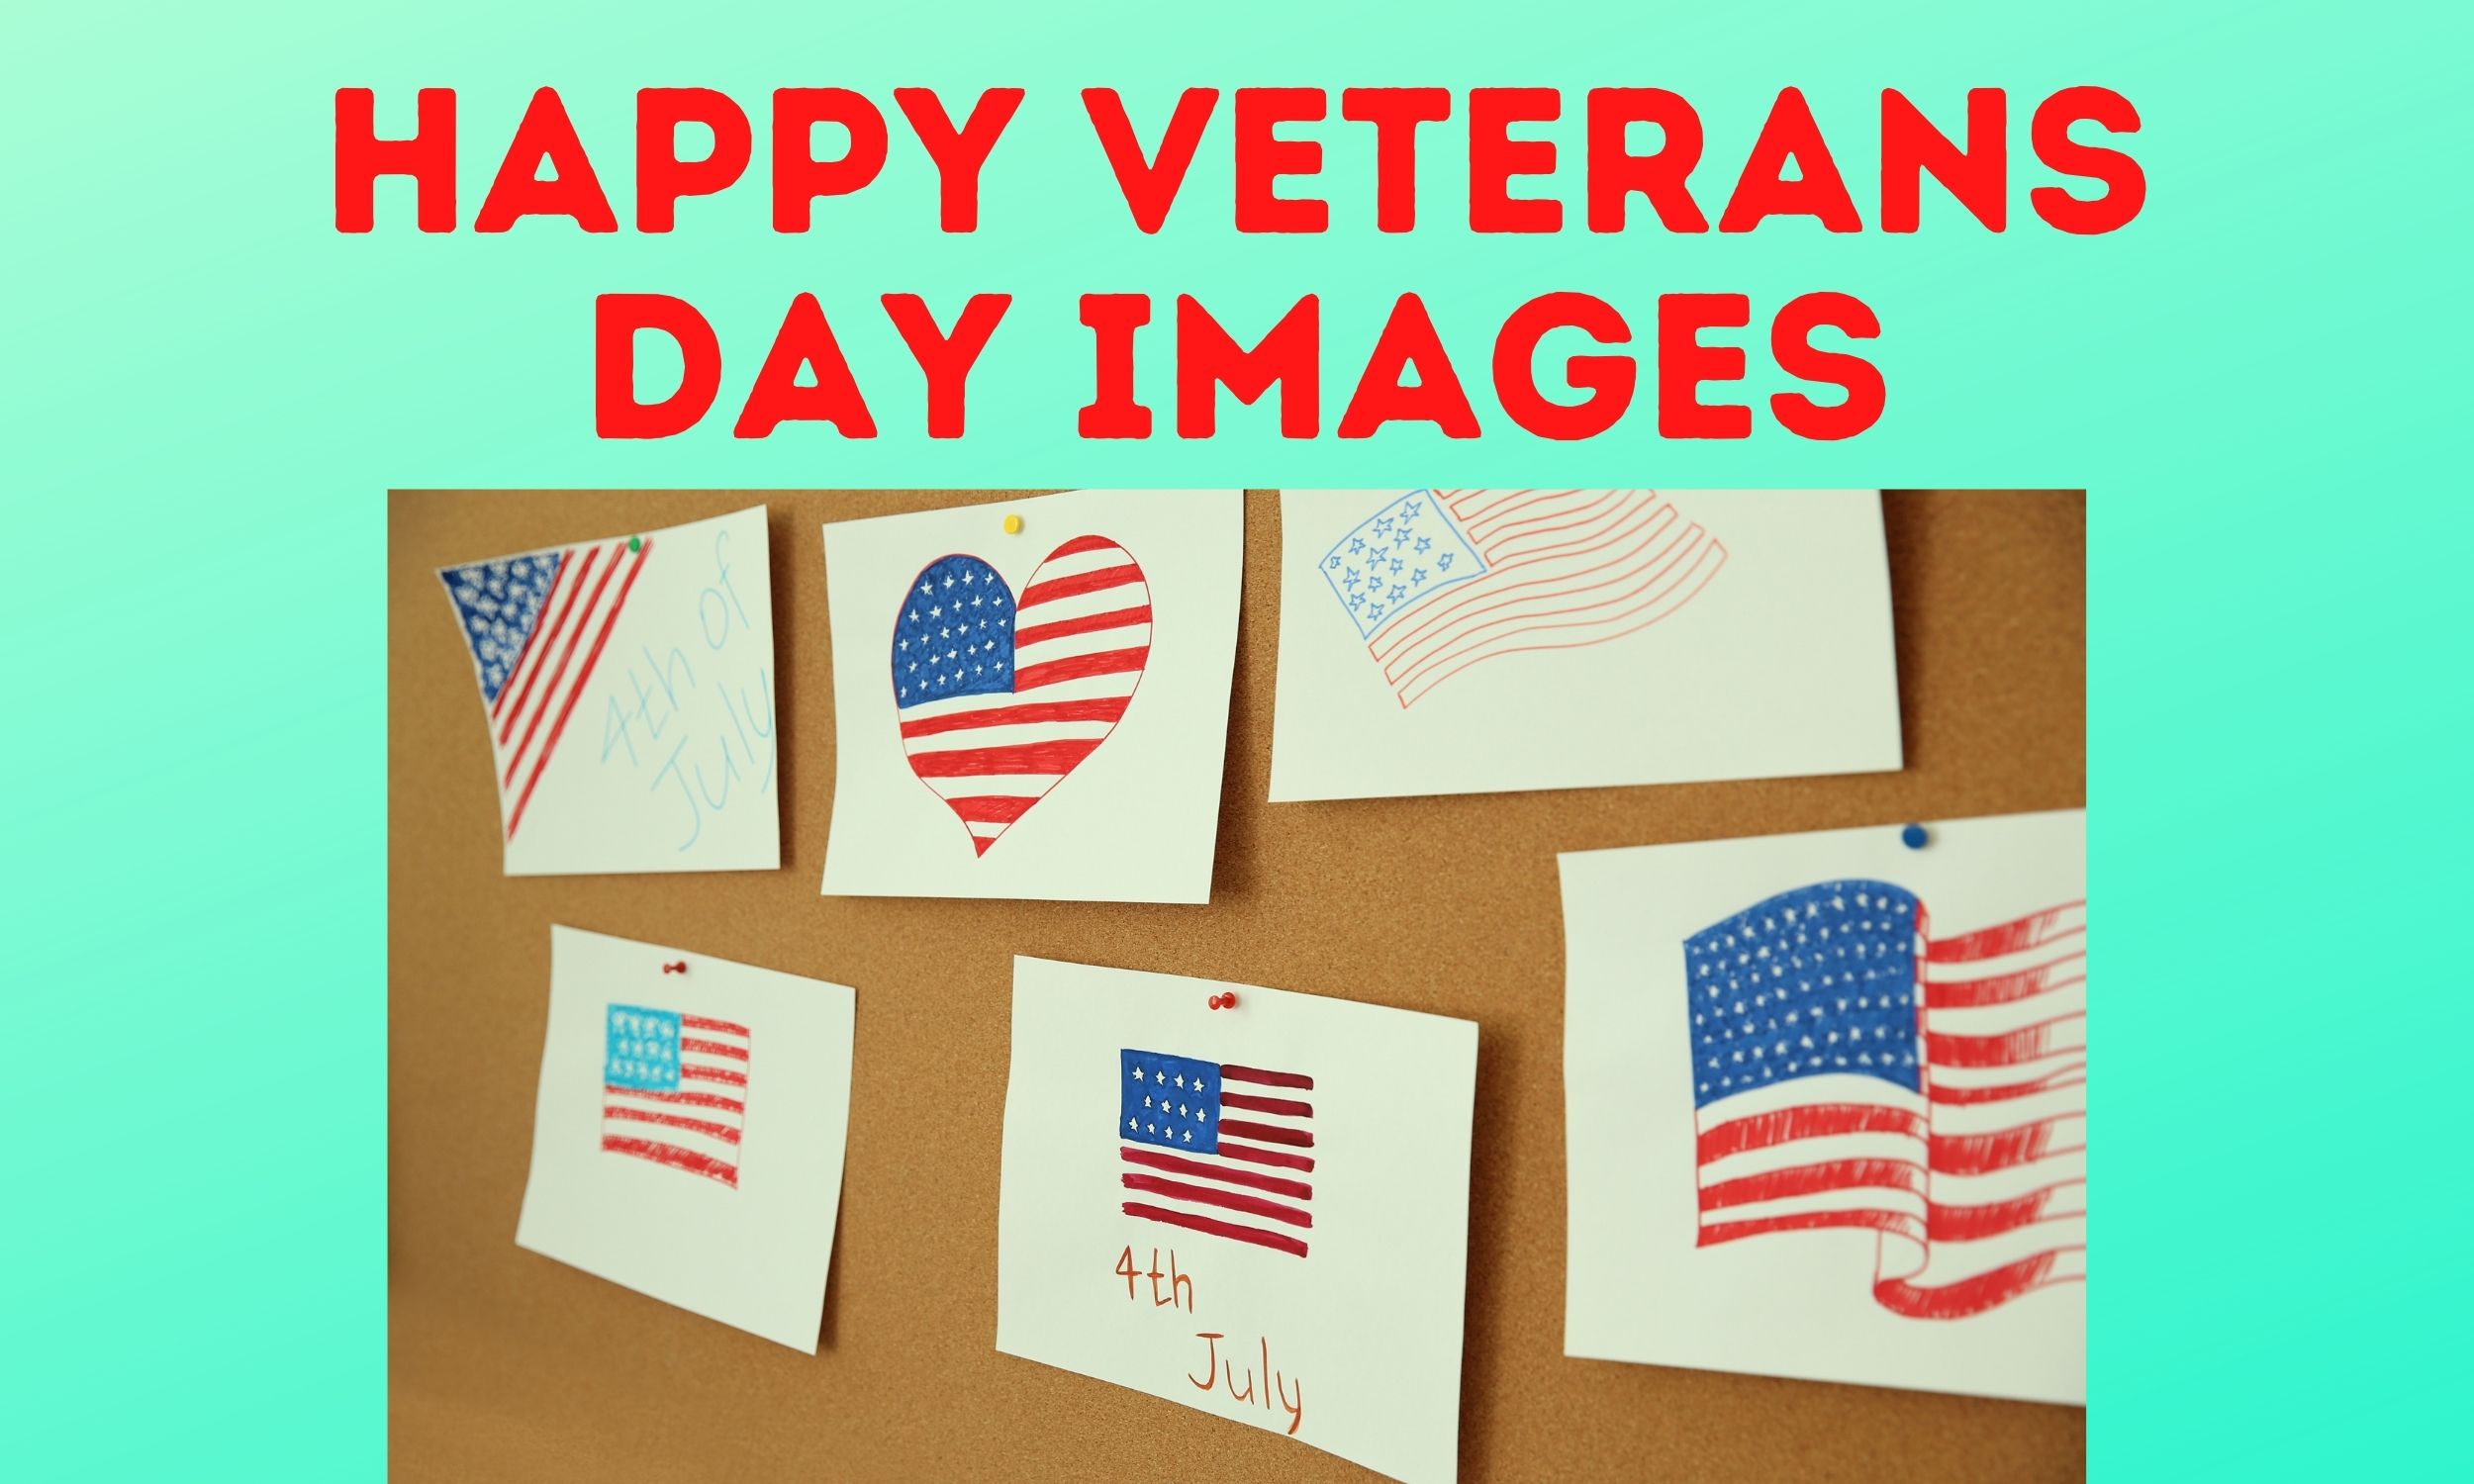 Happy Veterans Day images 2021